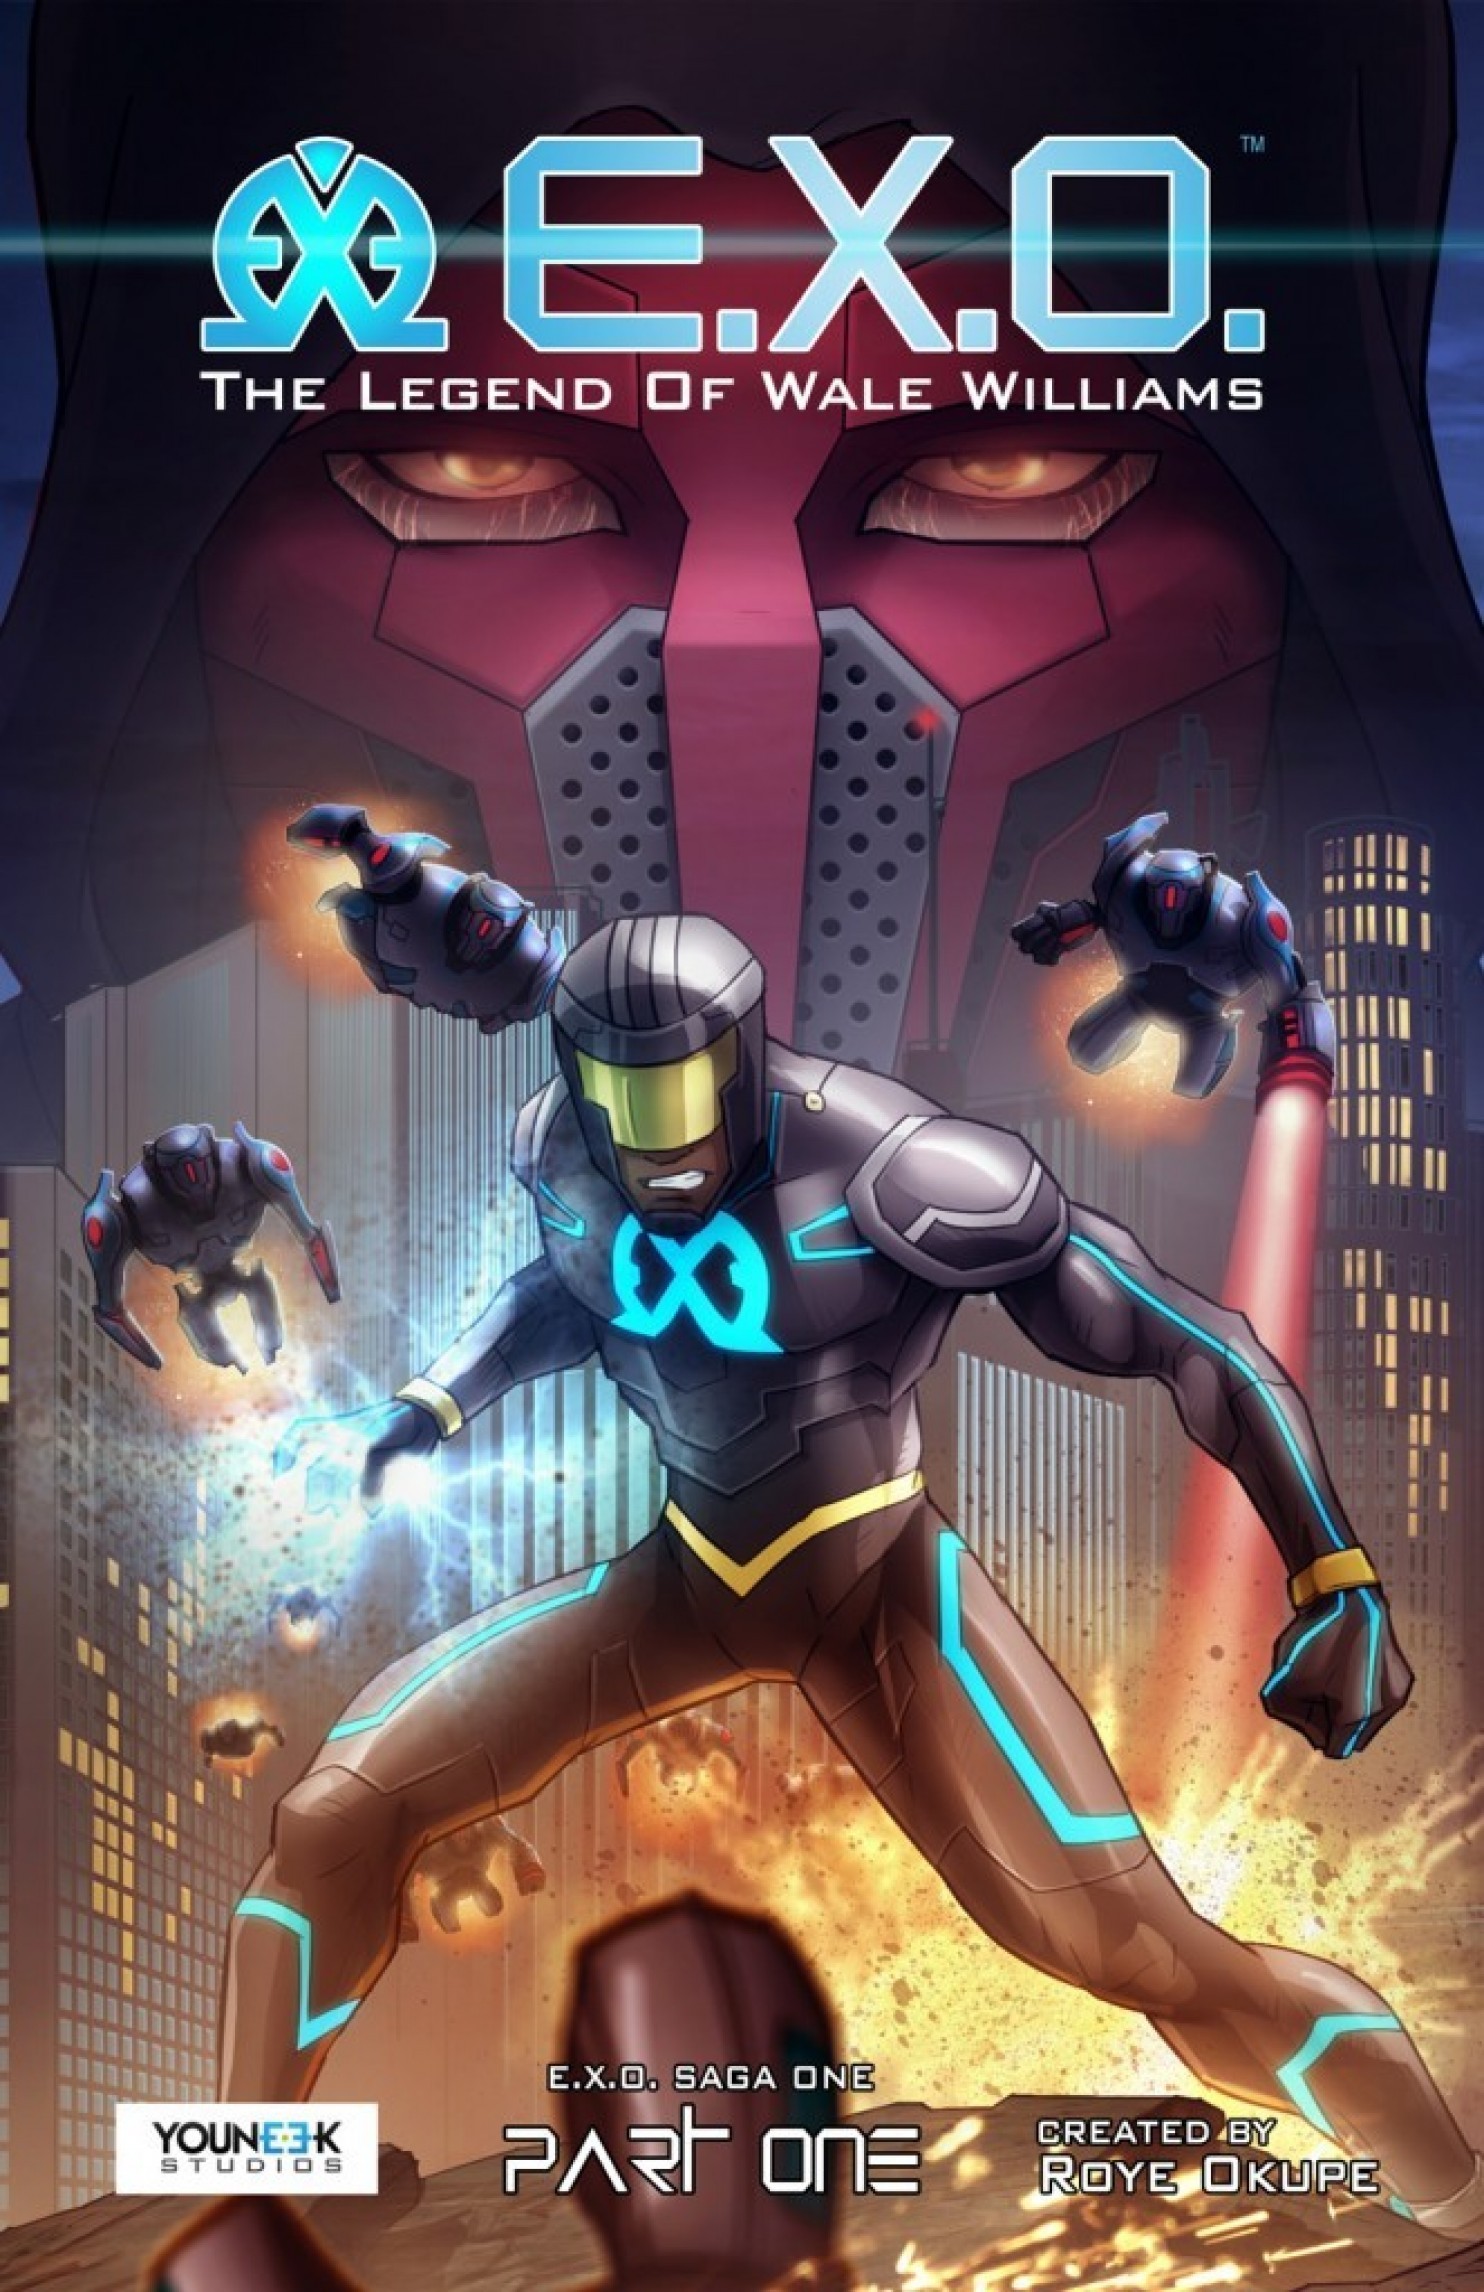 “E.X.O. The Legend of Wale Williams” was the first superhero to debut from Roye Okupe’s YouNeek Studios in 2015. (Courtesy of YouNeek Studios).